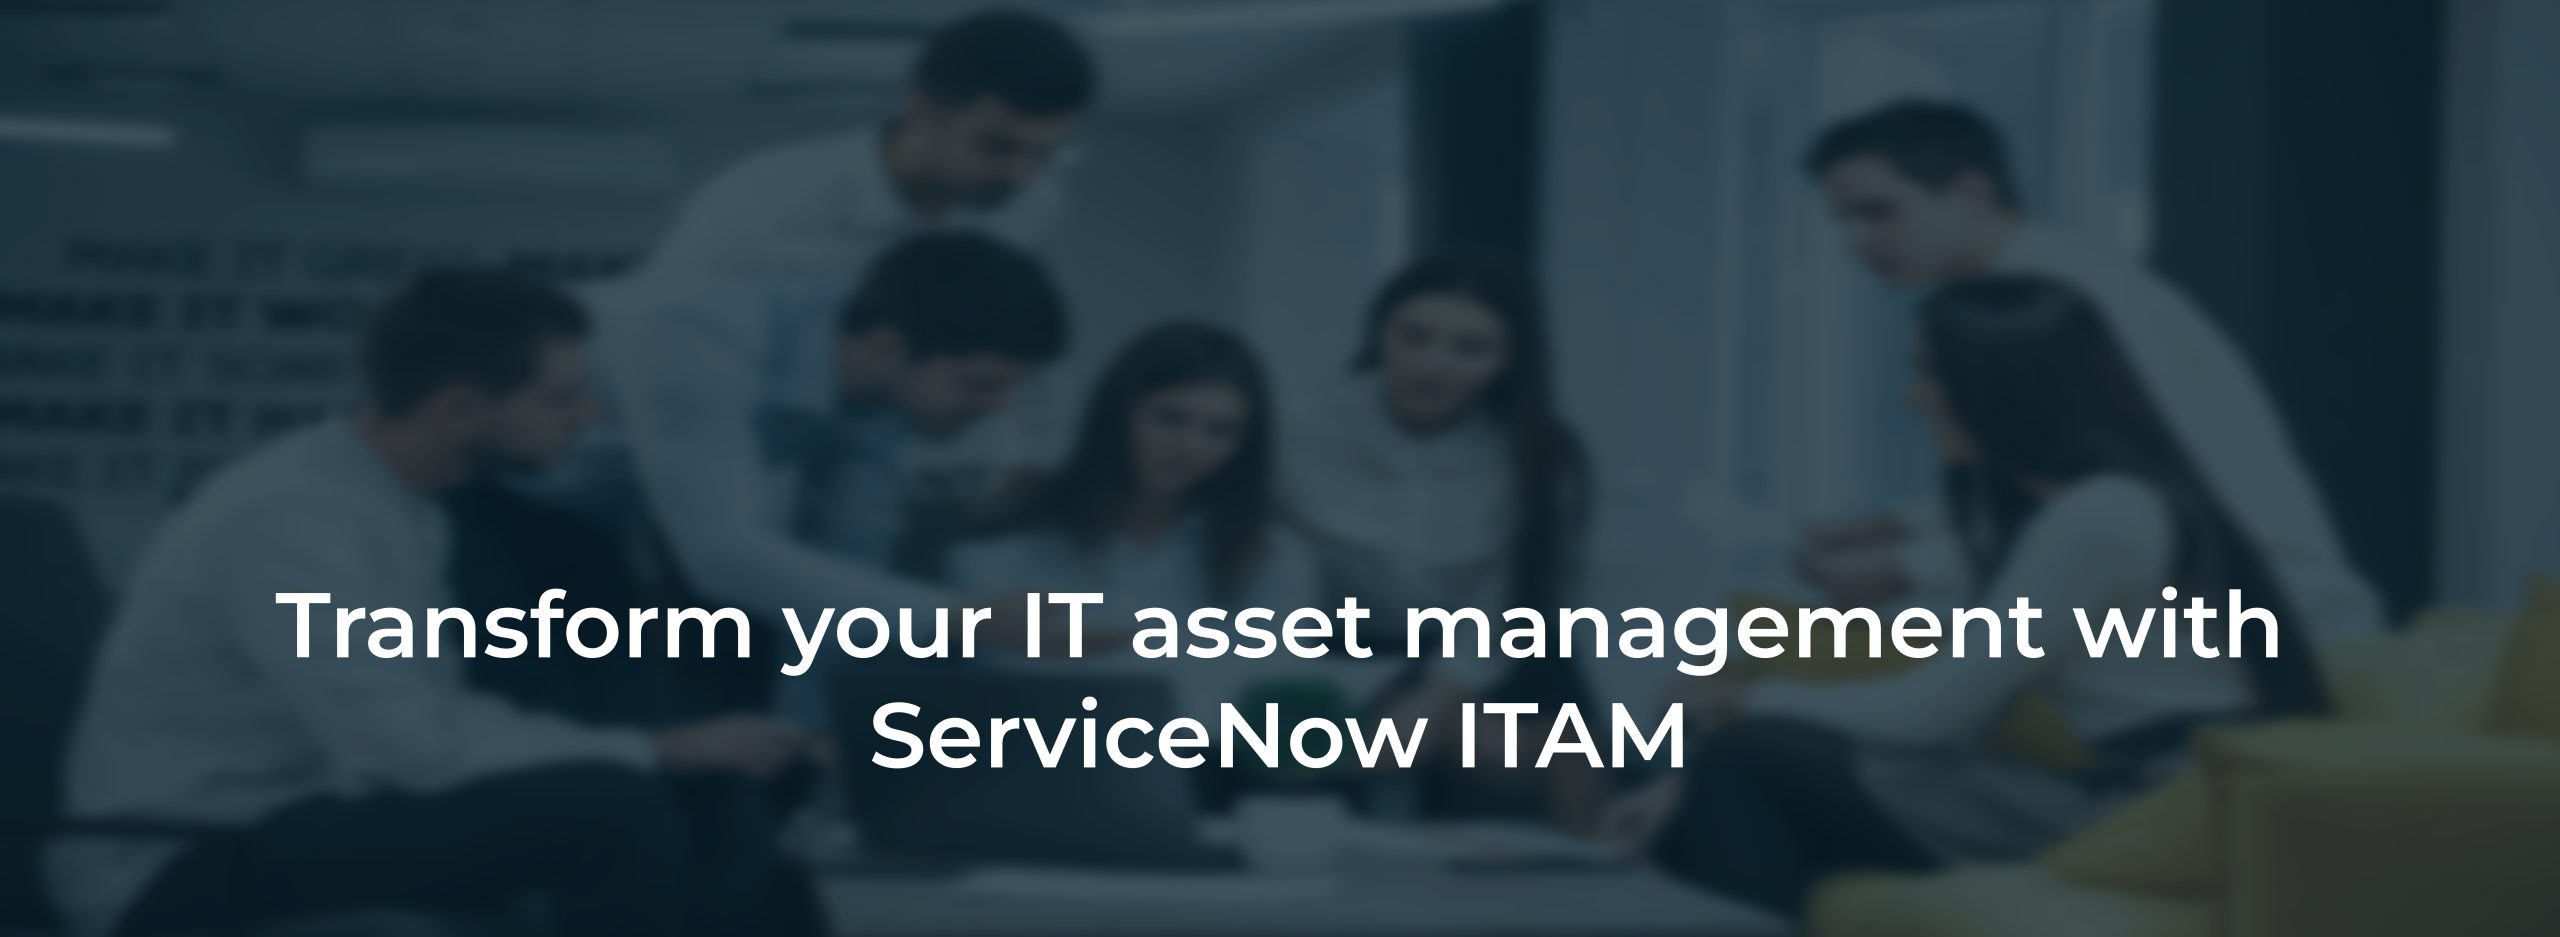 Transform your IT asset management with ServiceNow ITAM